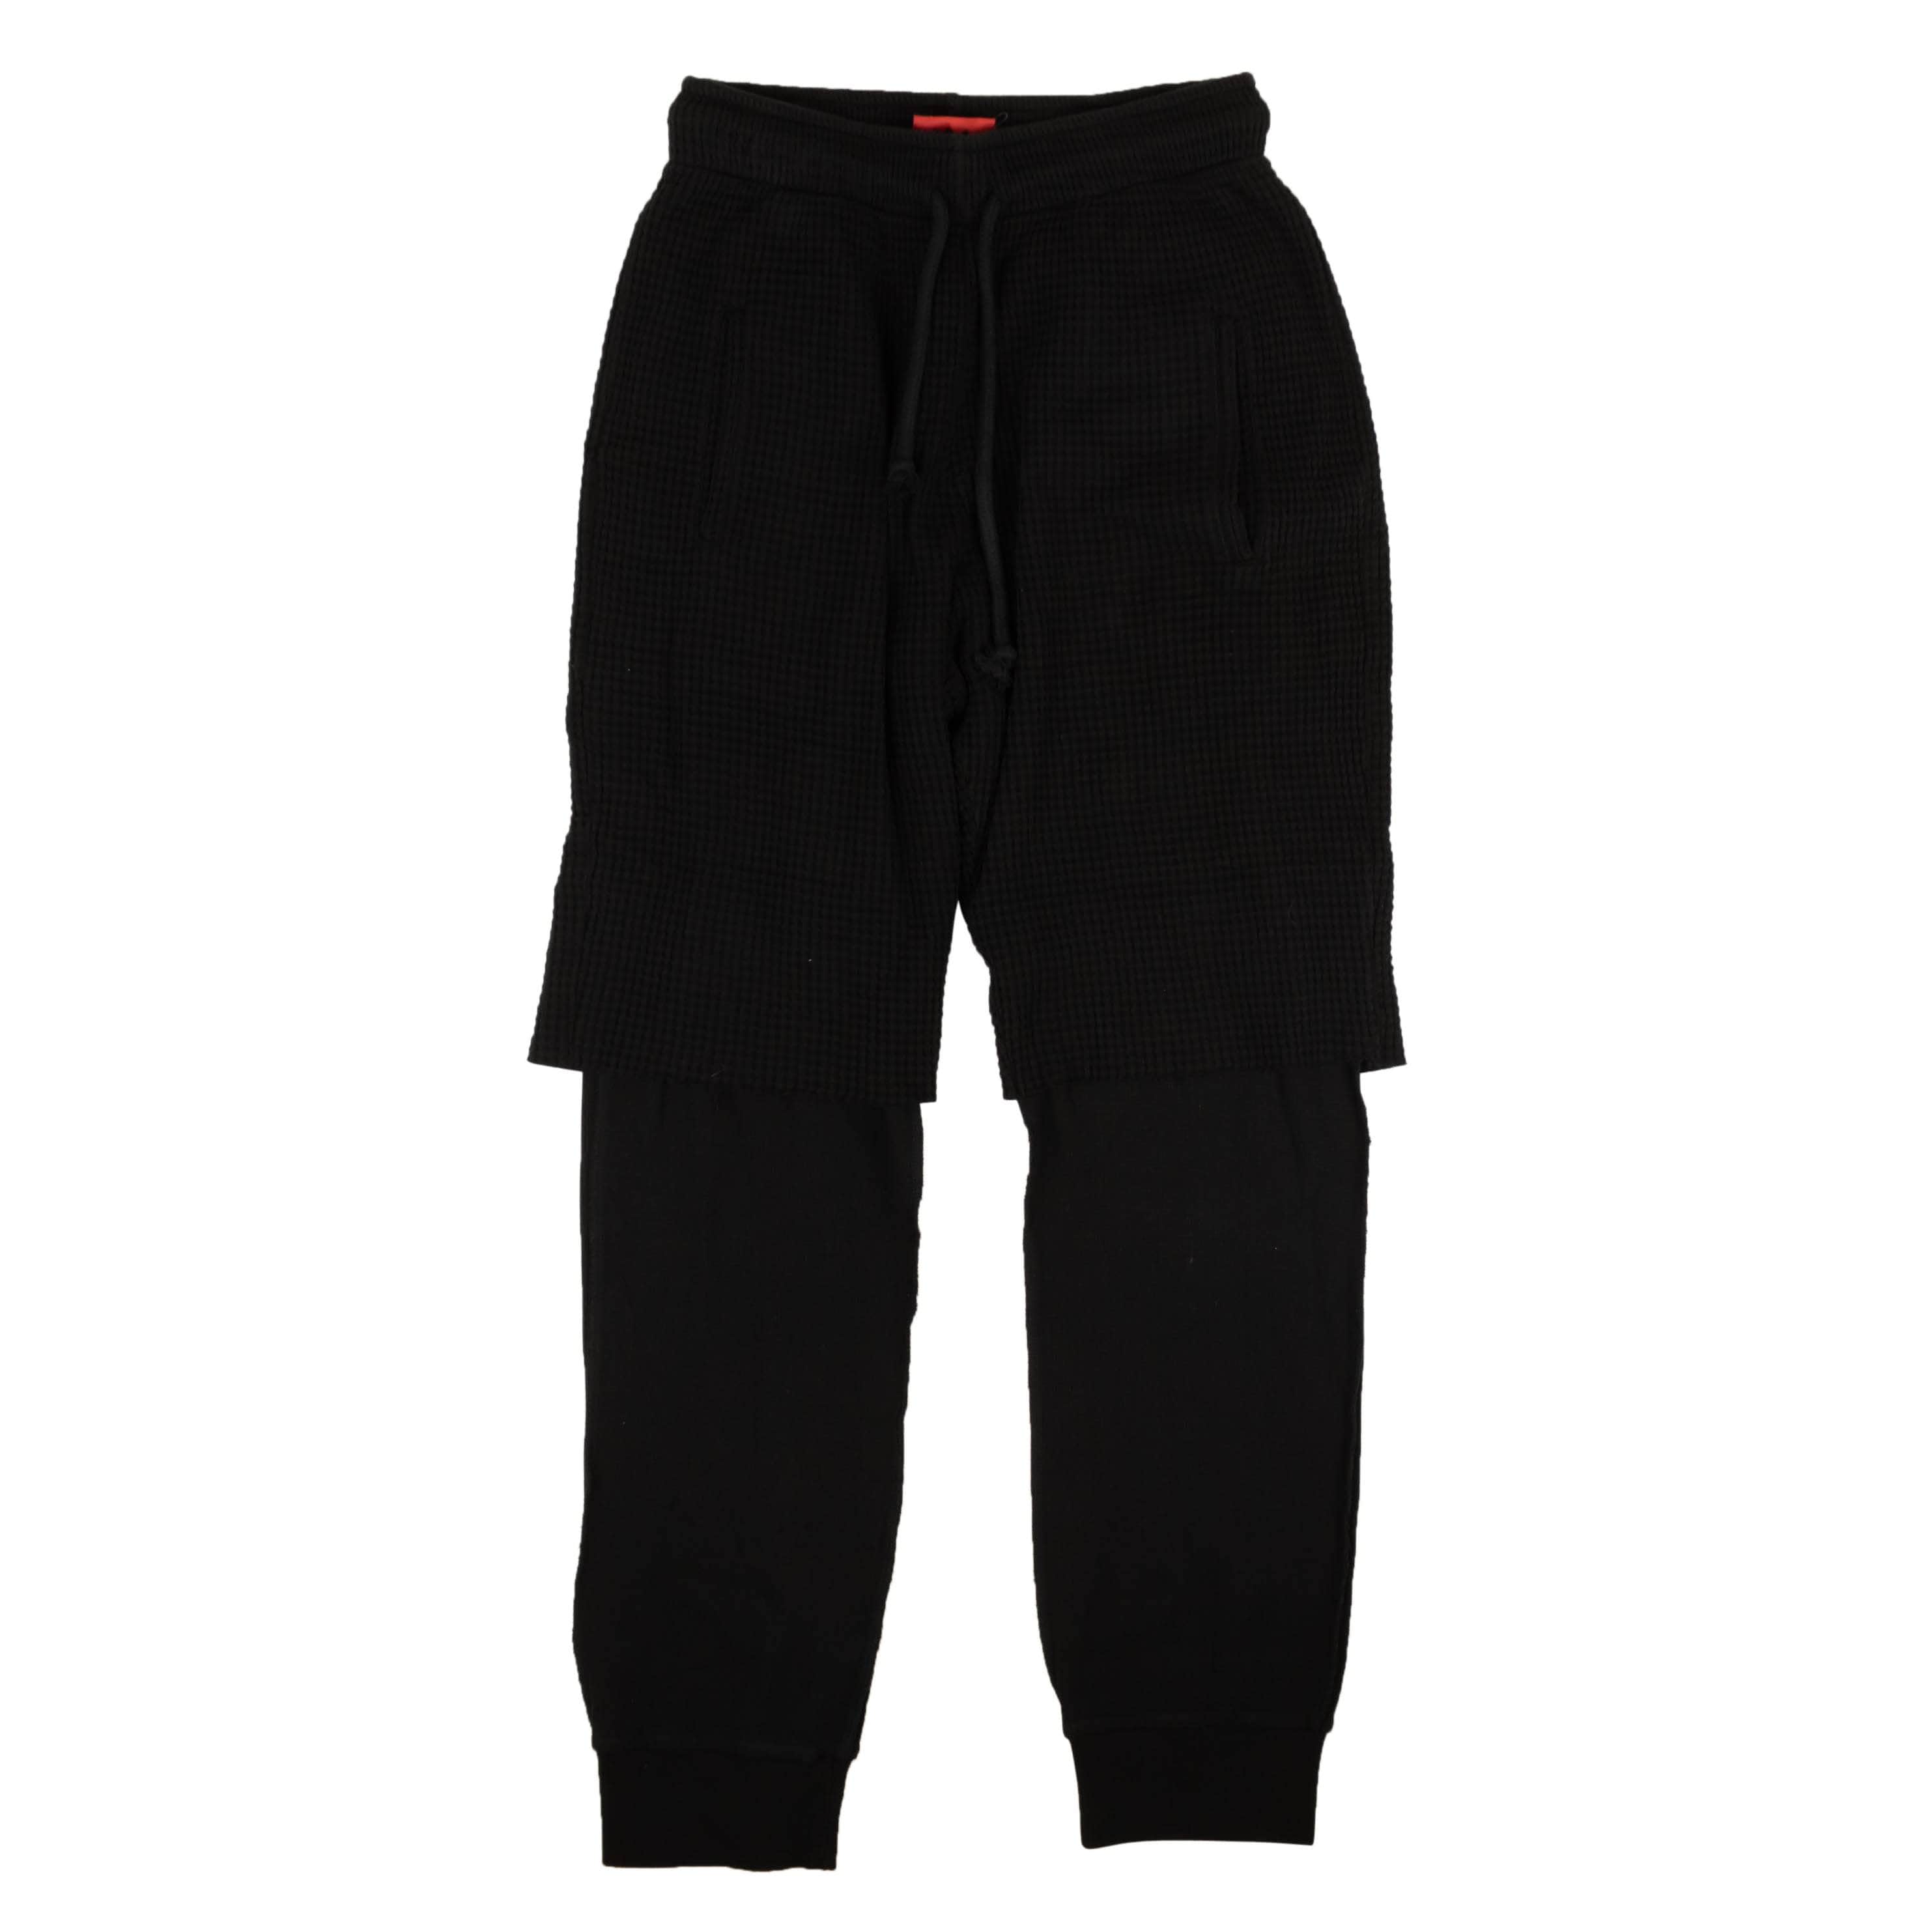 424 ON FAIRFAX 424-on-fairfax, channelenable-all, chicmi, couponcollection, gender-mens, main-clothing, mens-joggers-sweatpants, mens-shoes, size-s, under-250 S / 95-424-1141/S Black Waffle Knit Double Layer Sweatpants 95-424-1141/S 95-424-1141/S